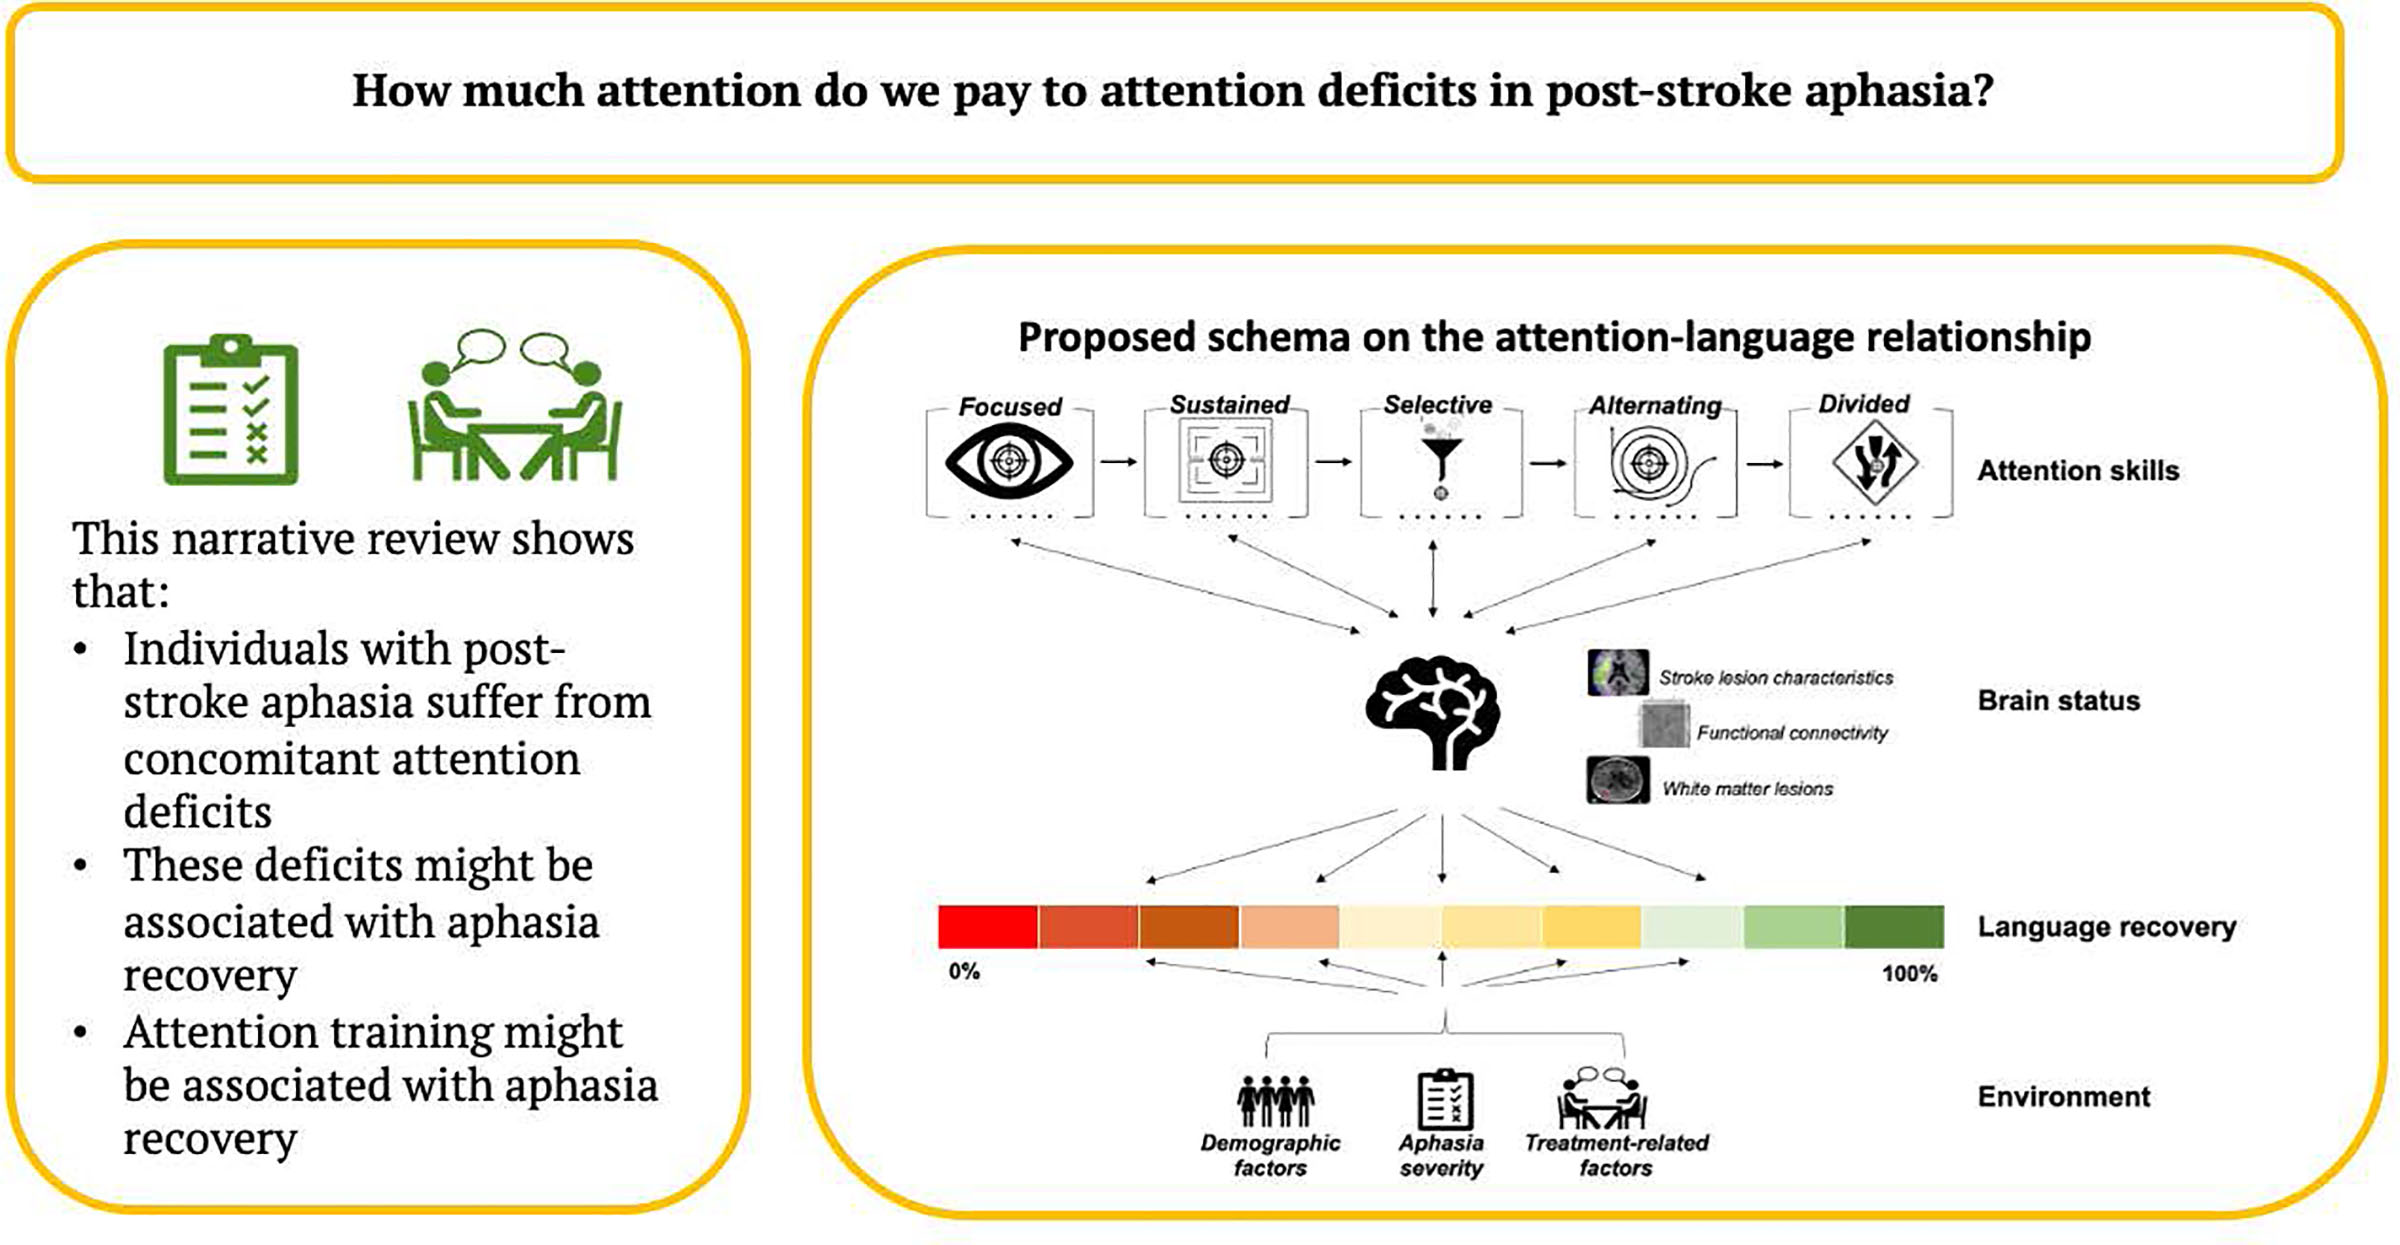 How Much Attention Do We Pay to Attention Deficits in Poststroke Aphasia?